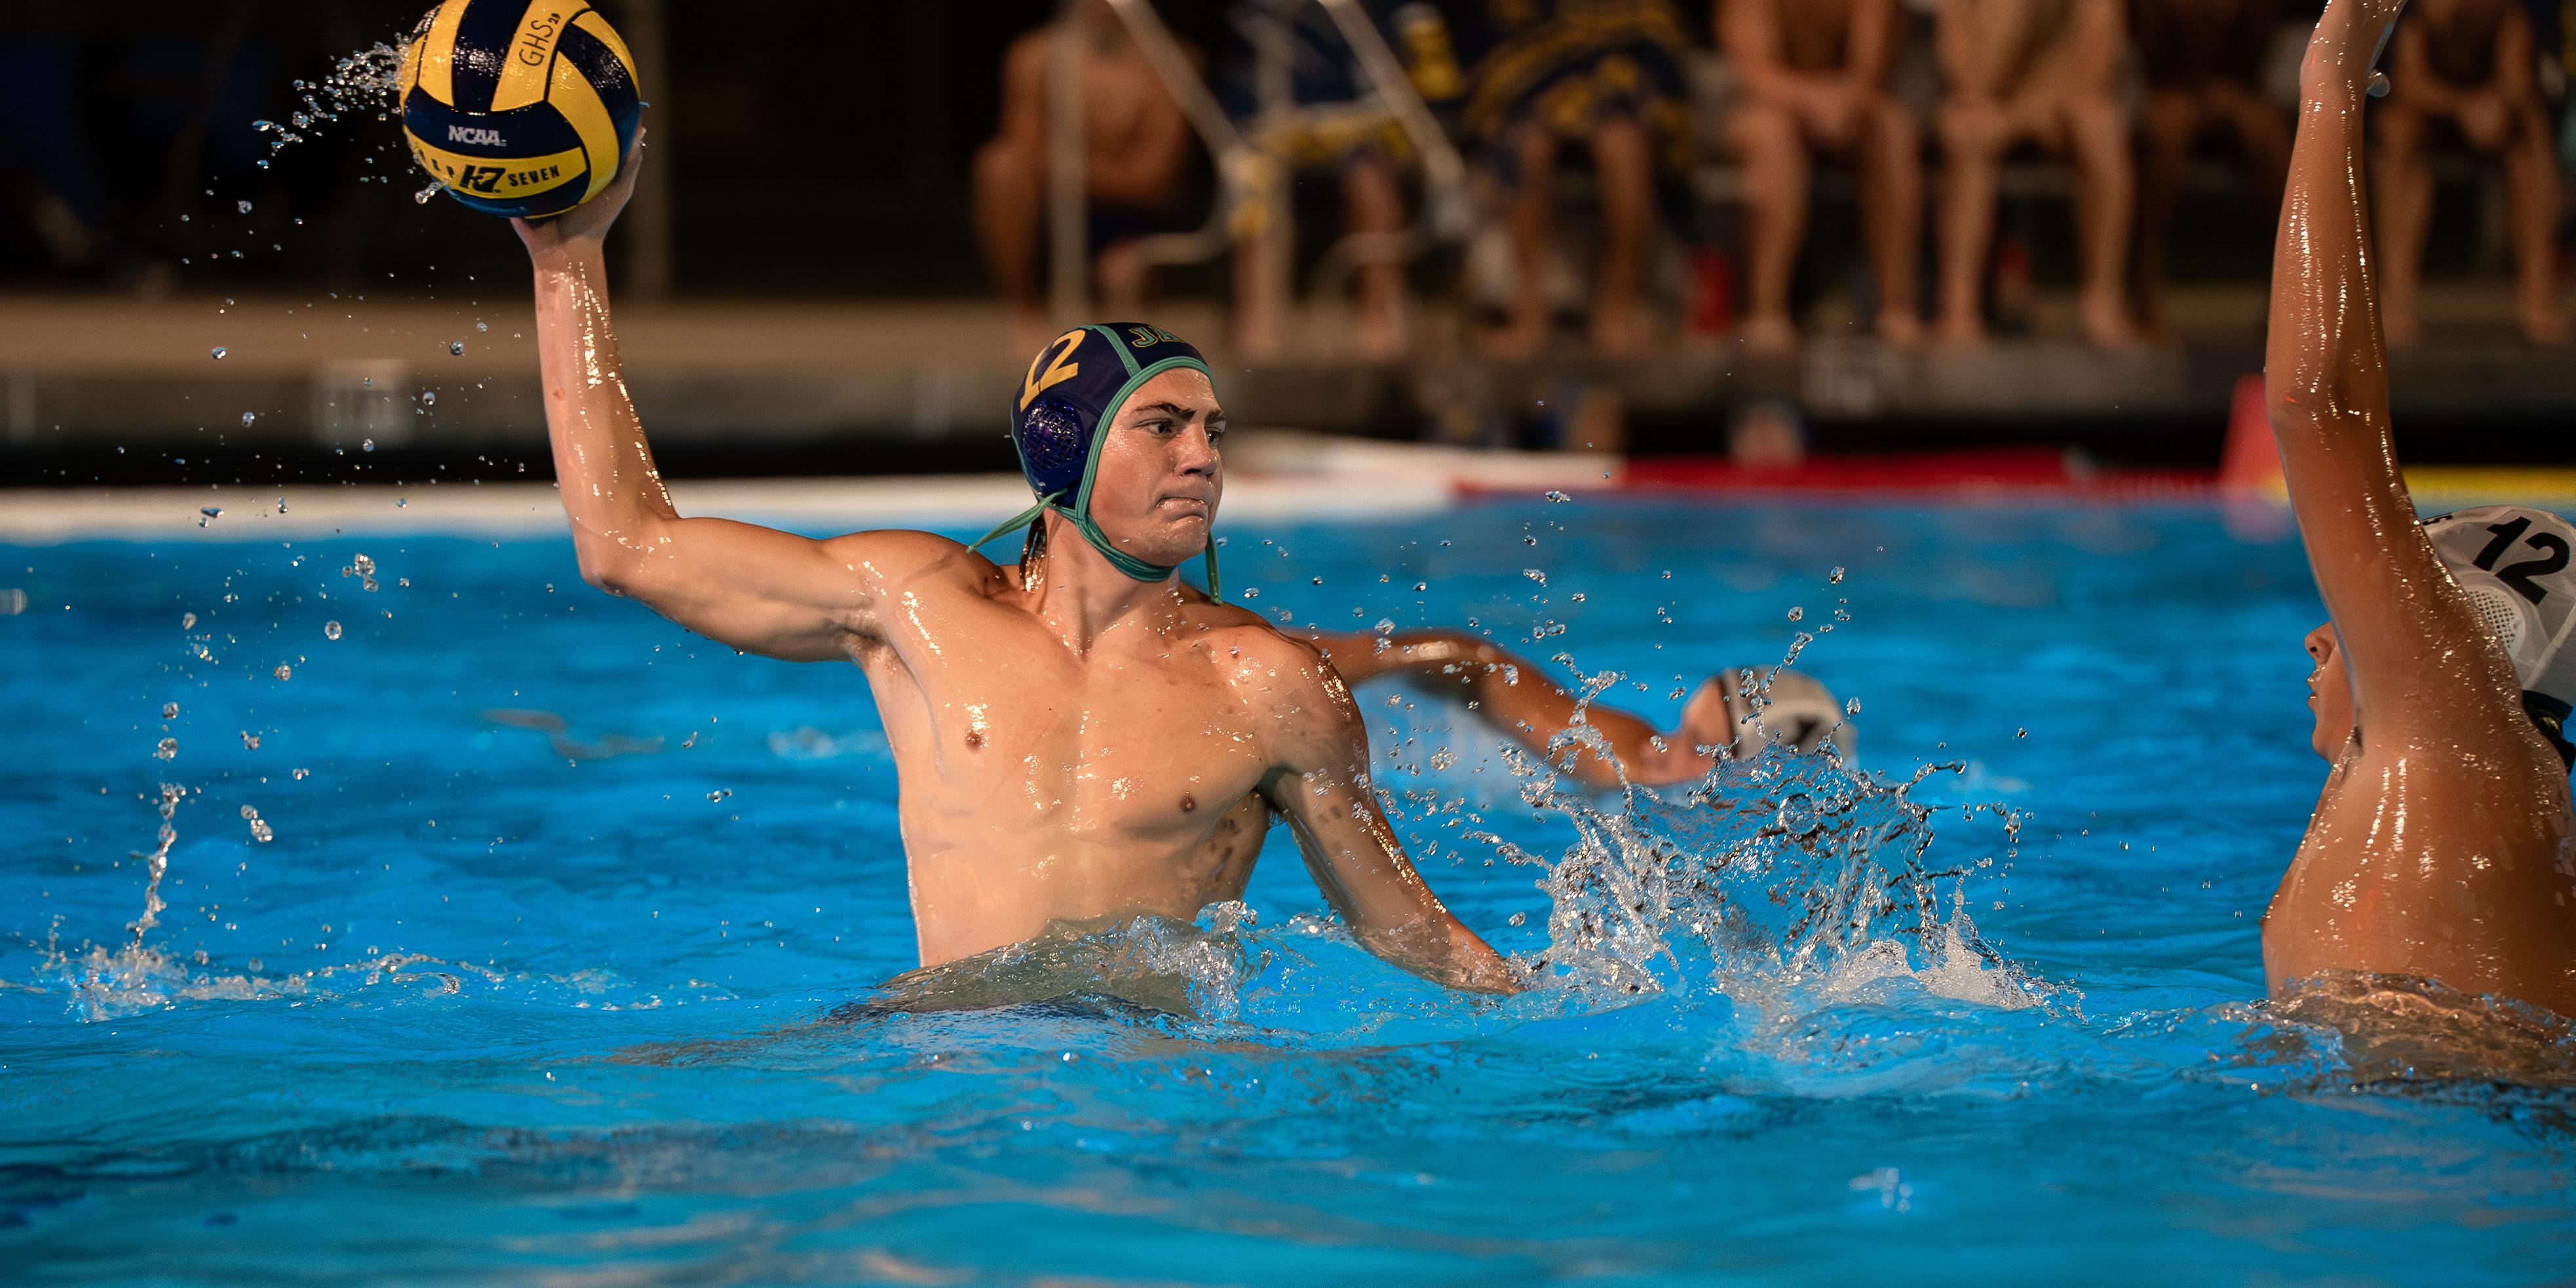 Waterpolo Player